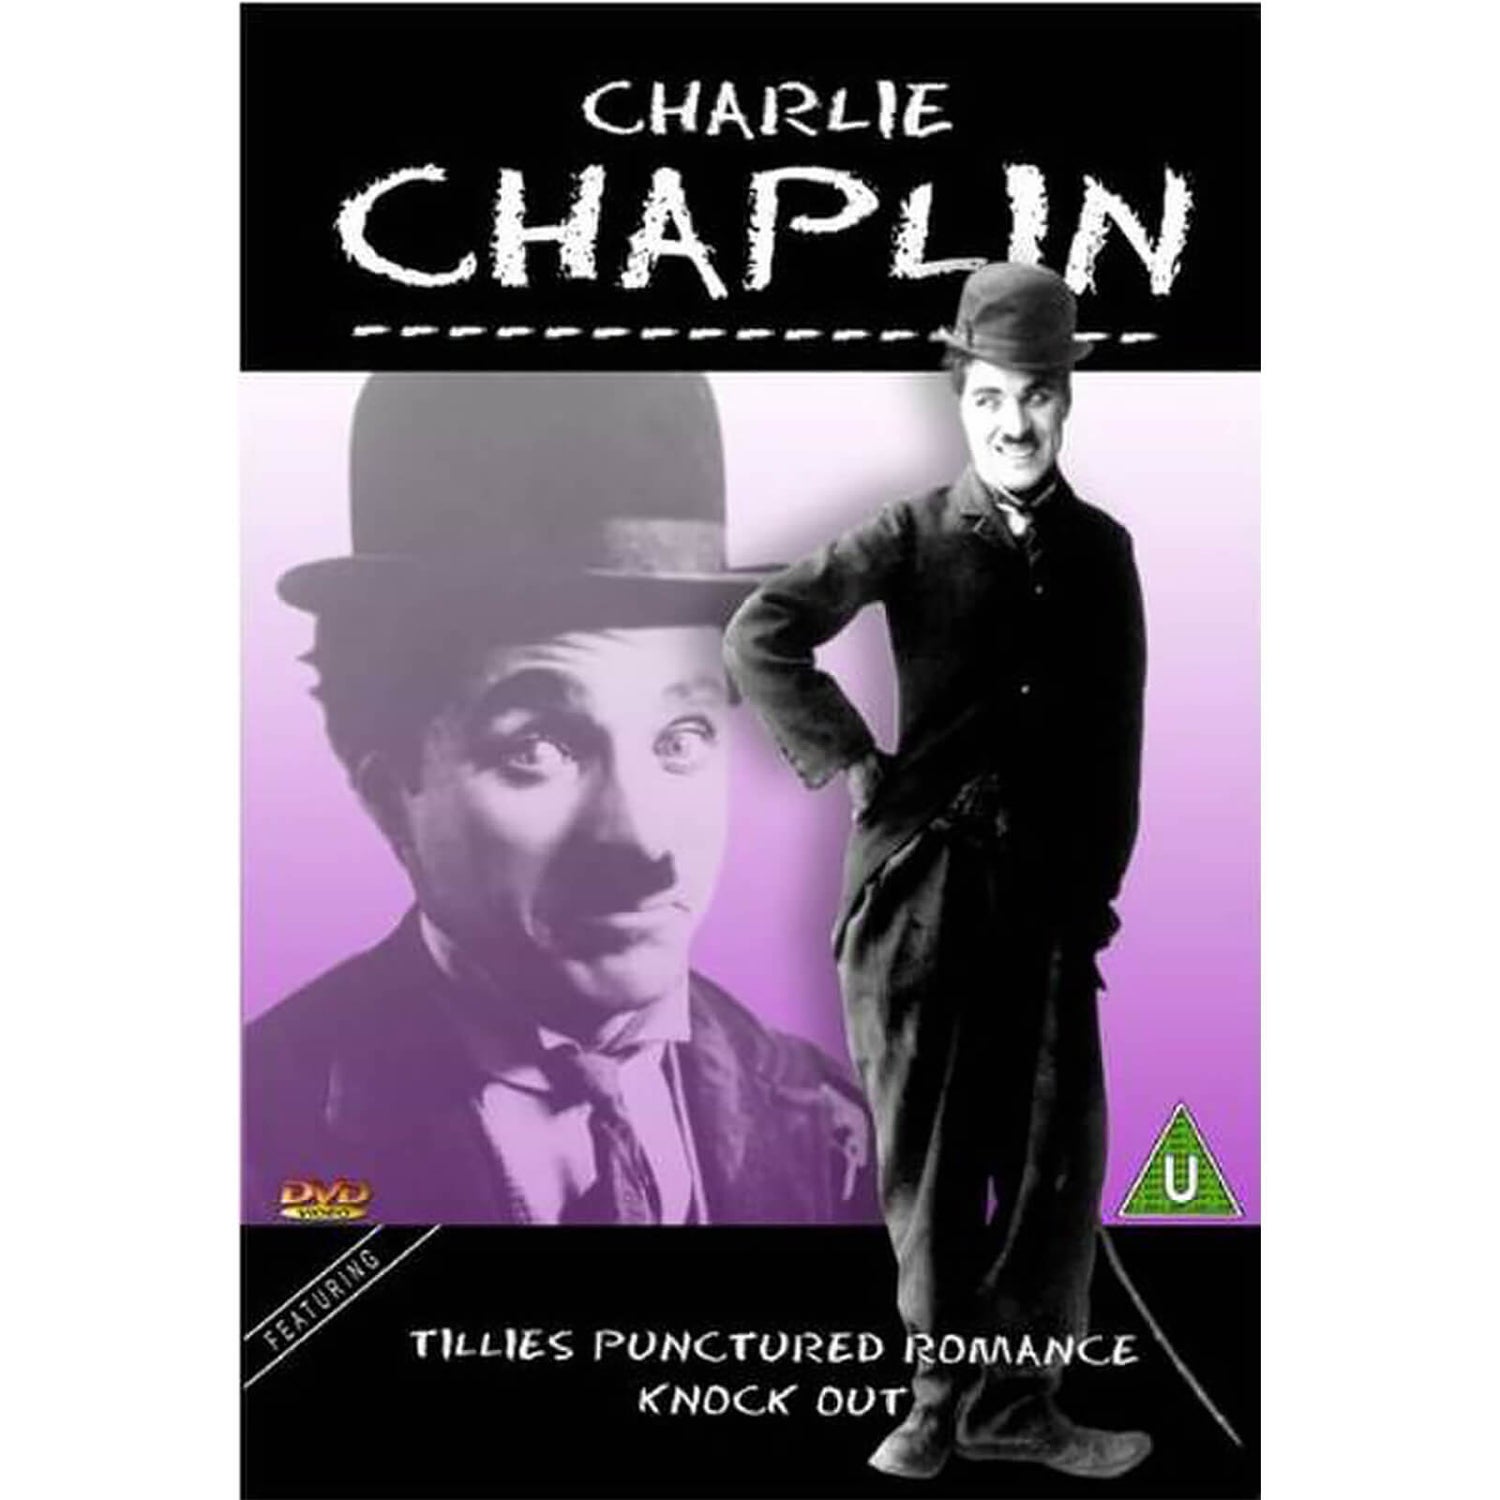 CHARLIE CHAPLIN COLLECTION 2